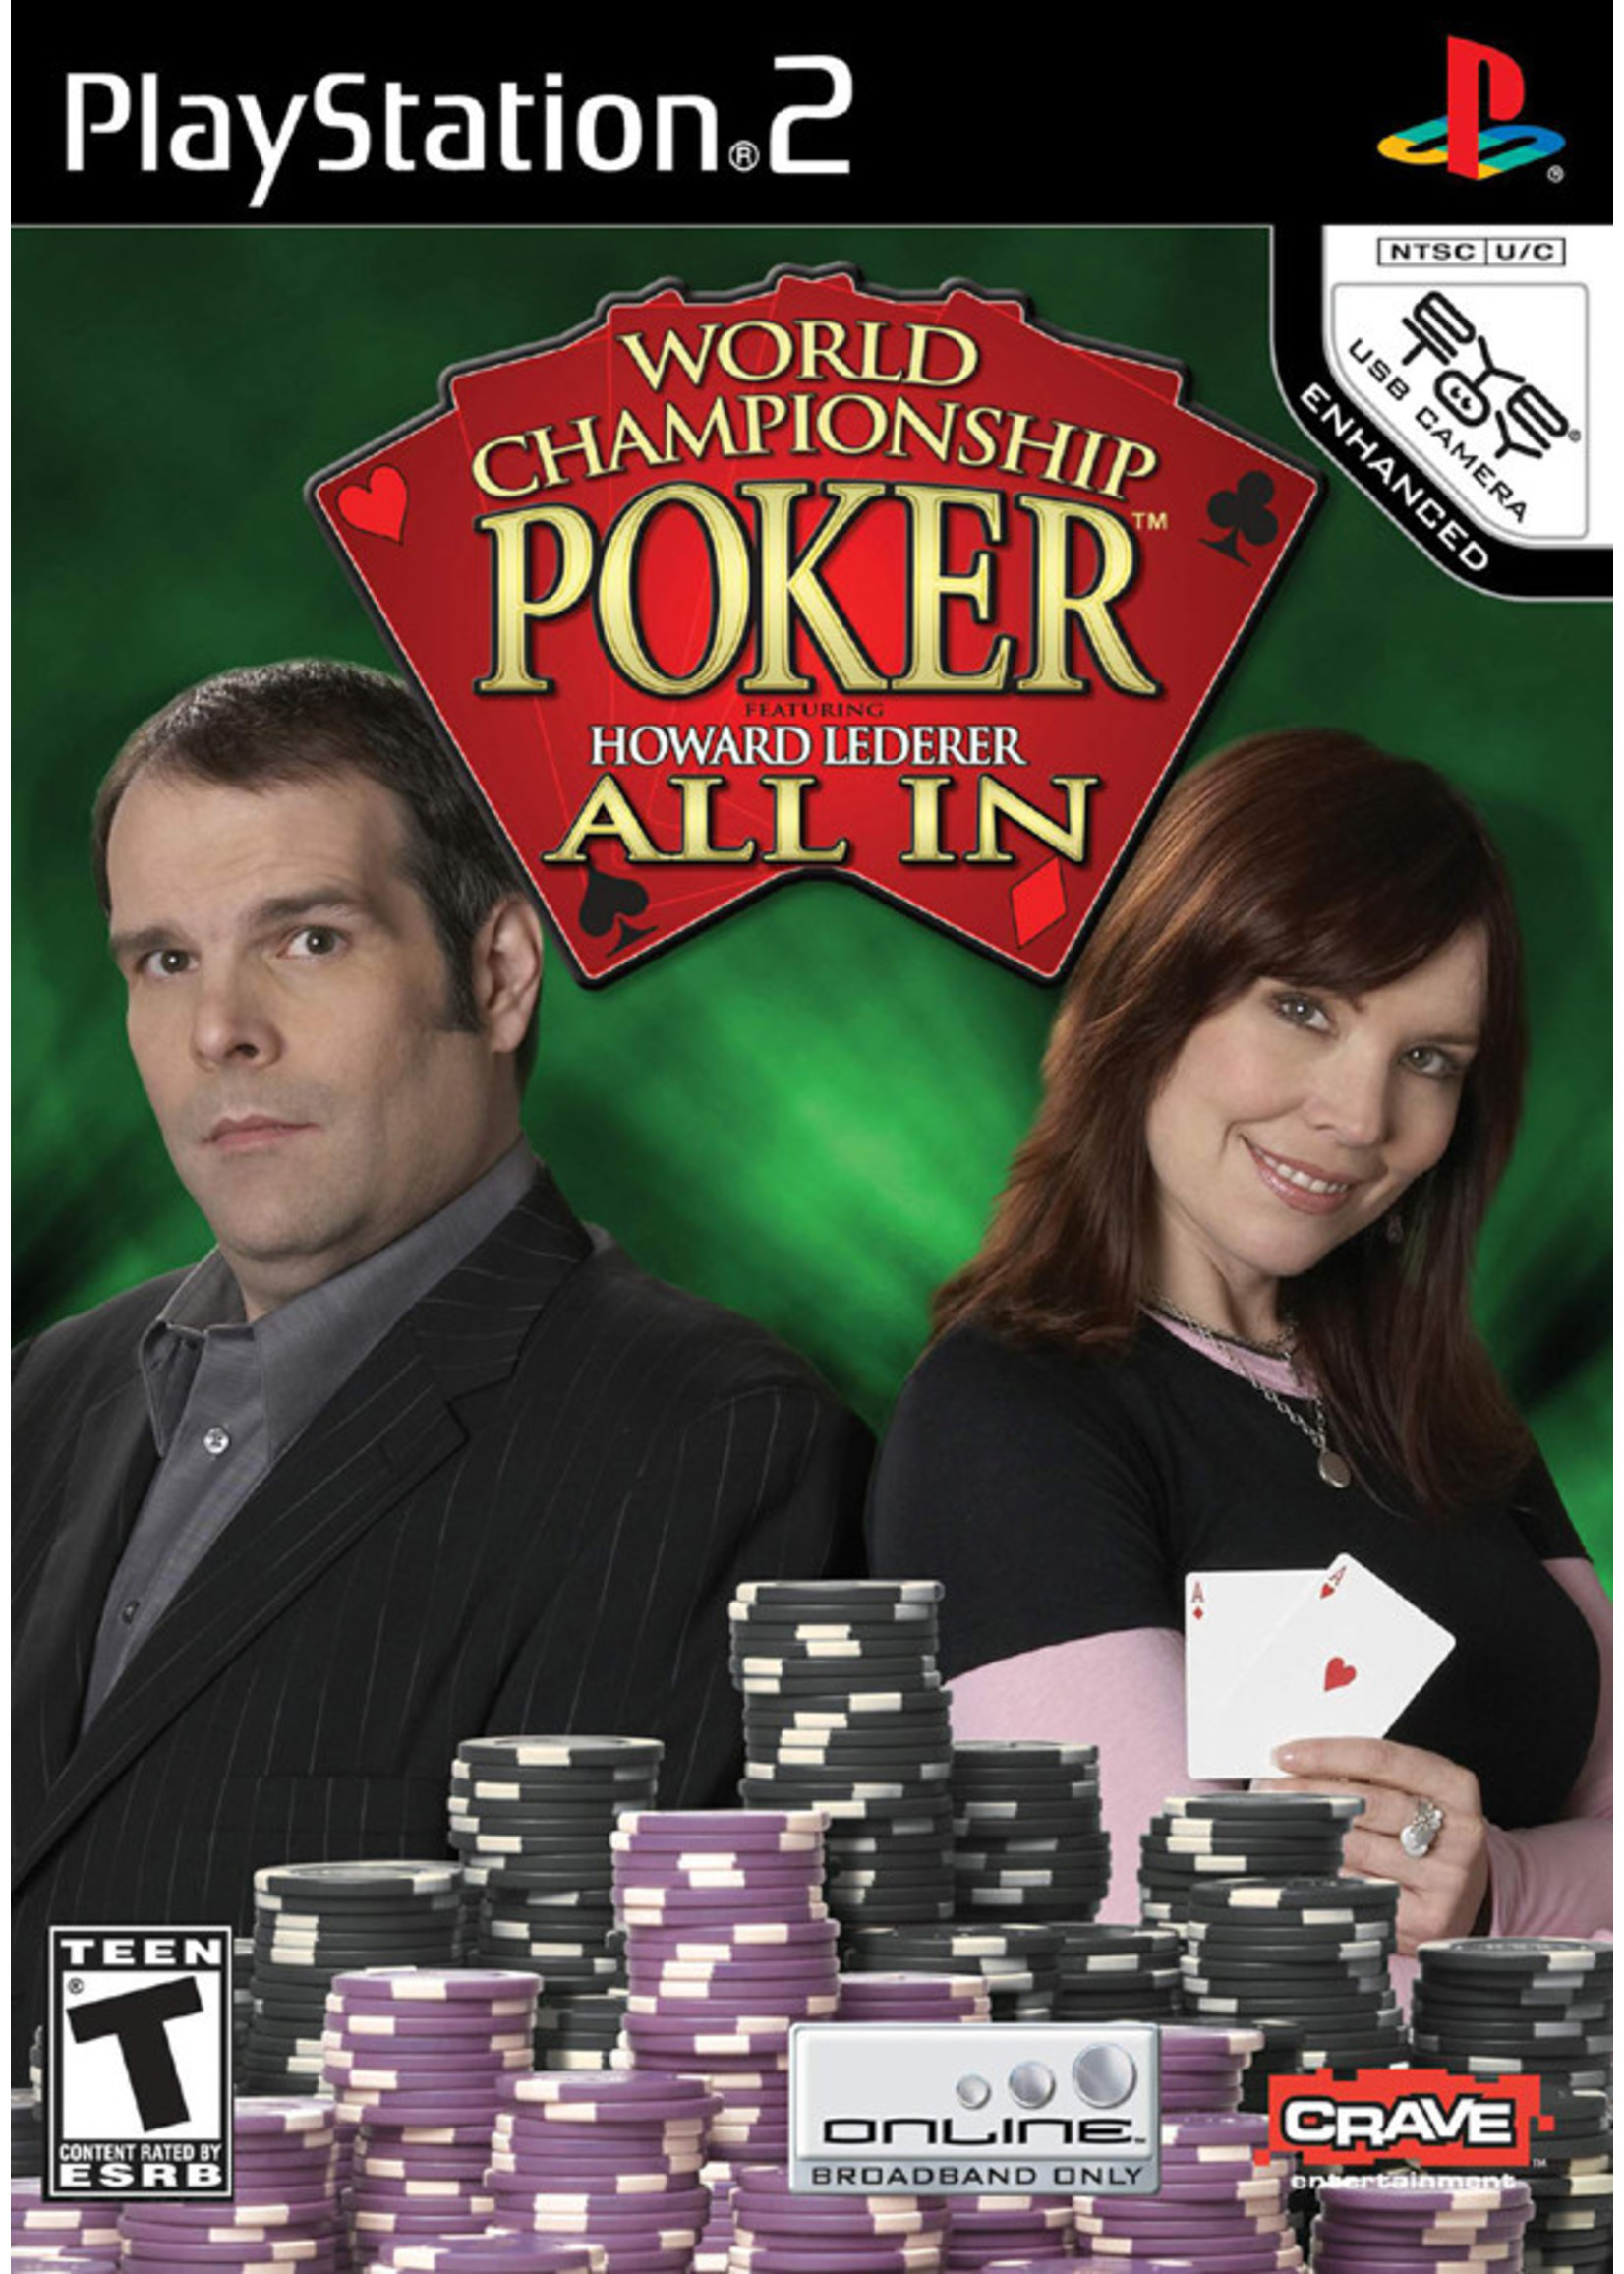 Sony Playstation 2 (PS2) World Championship Poker All In